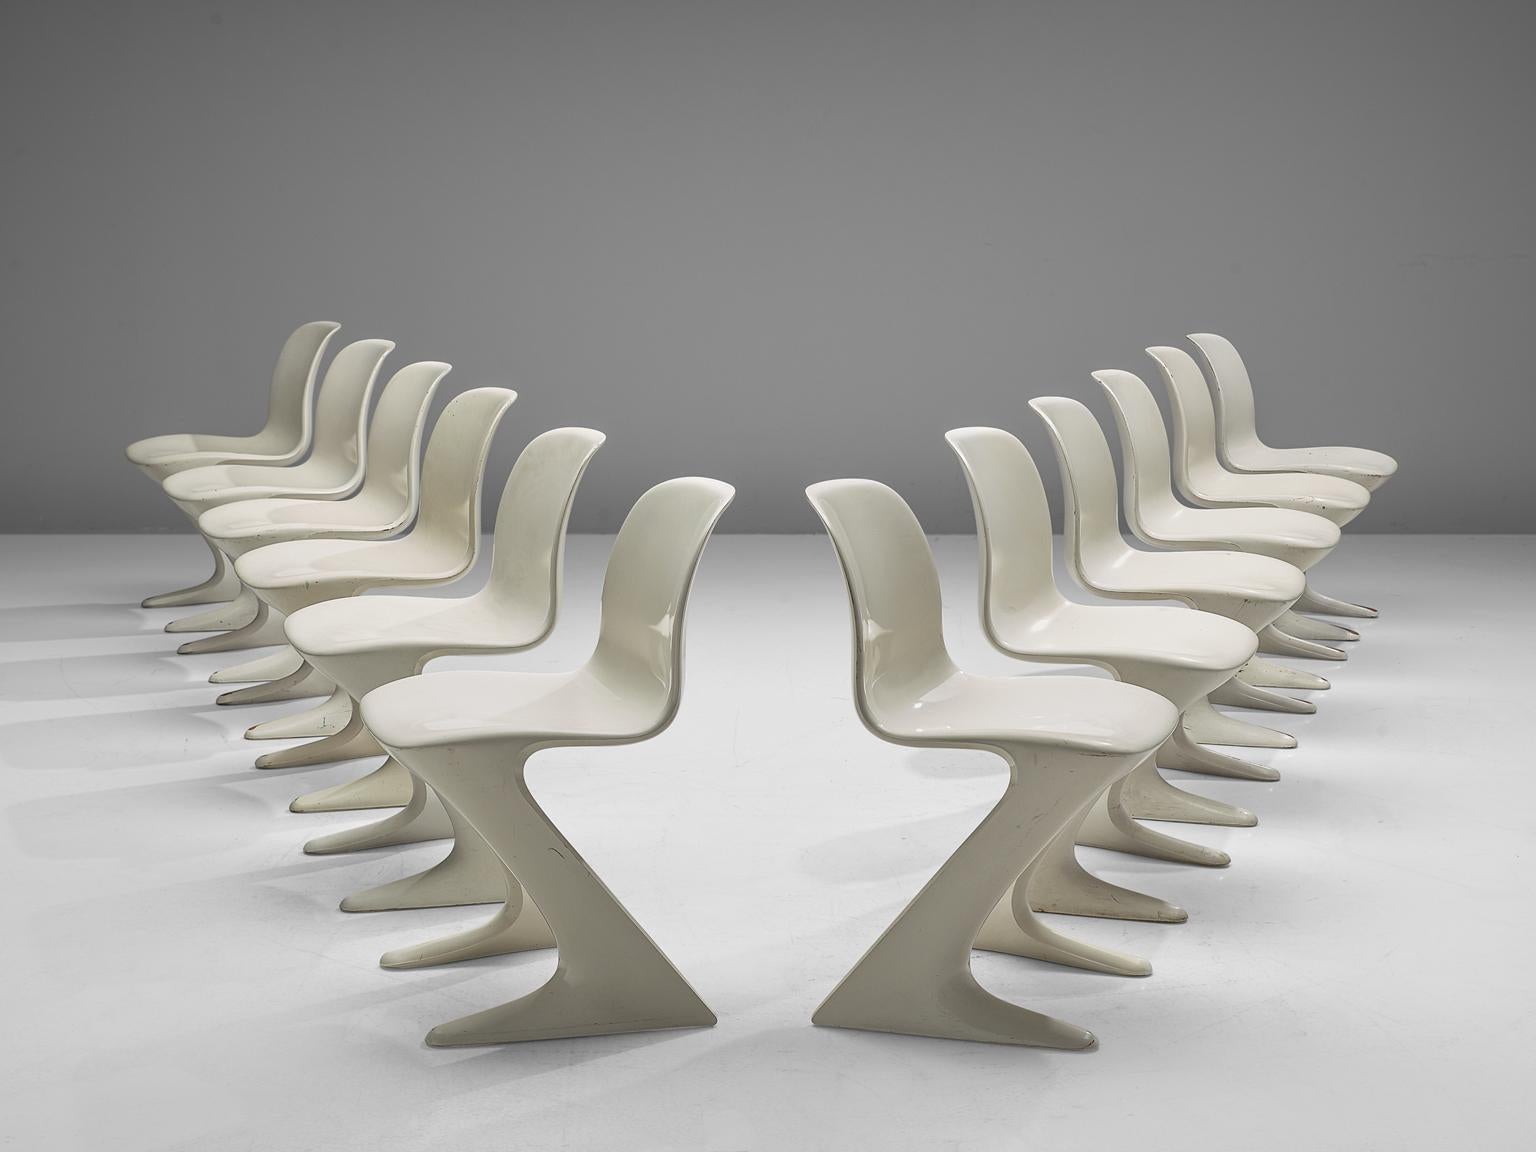 Ernst Moeckl for Trabant, 'Z' chairs, fiberglass, Germany, 1968

This set of Kangaroo chairs is designed by Ernste Moeckl in 1968. The chair is also called the Z-chair, referring to its shape. During the period of the Iron Curtain, the Panton Chair